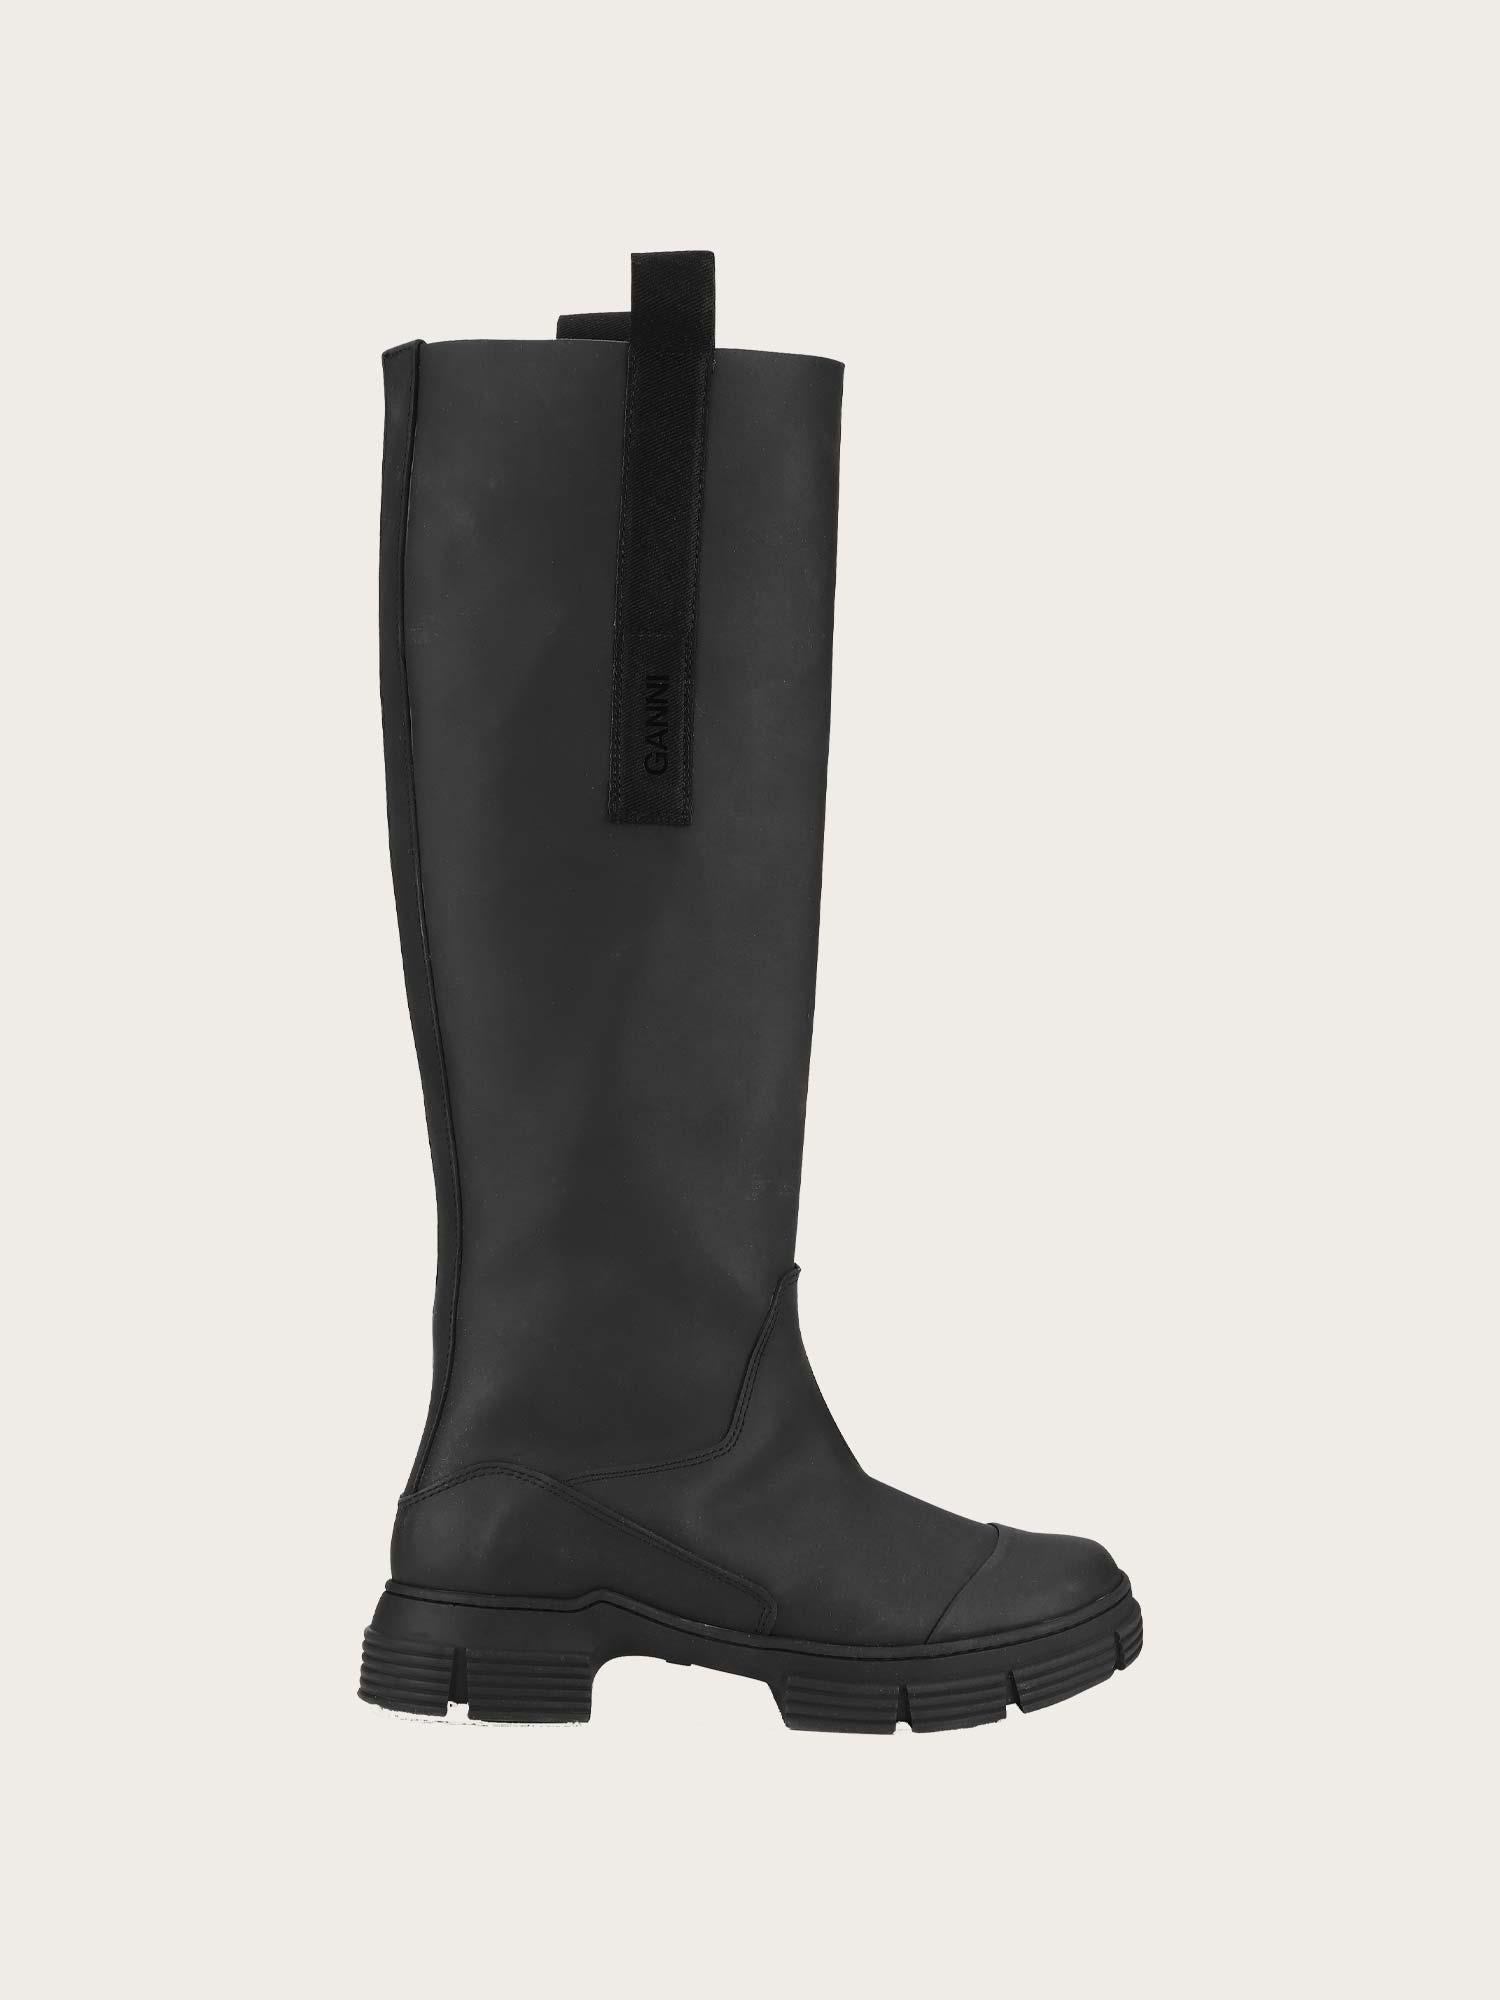 S1527 Recycled Rubber Country Boot Black